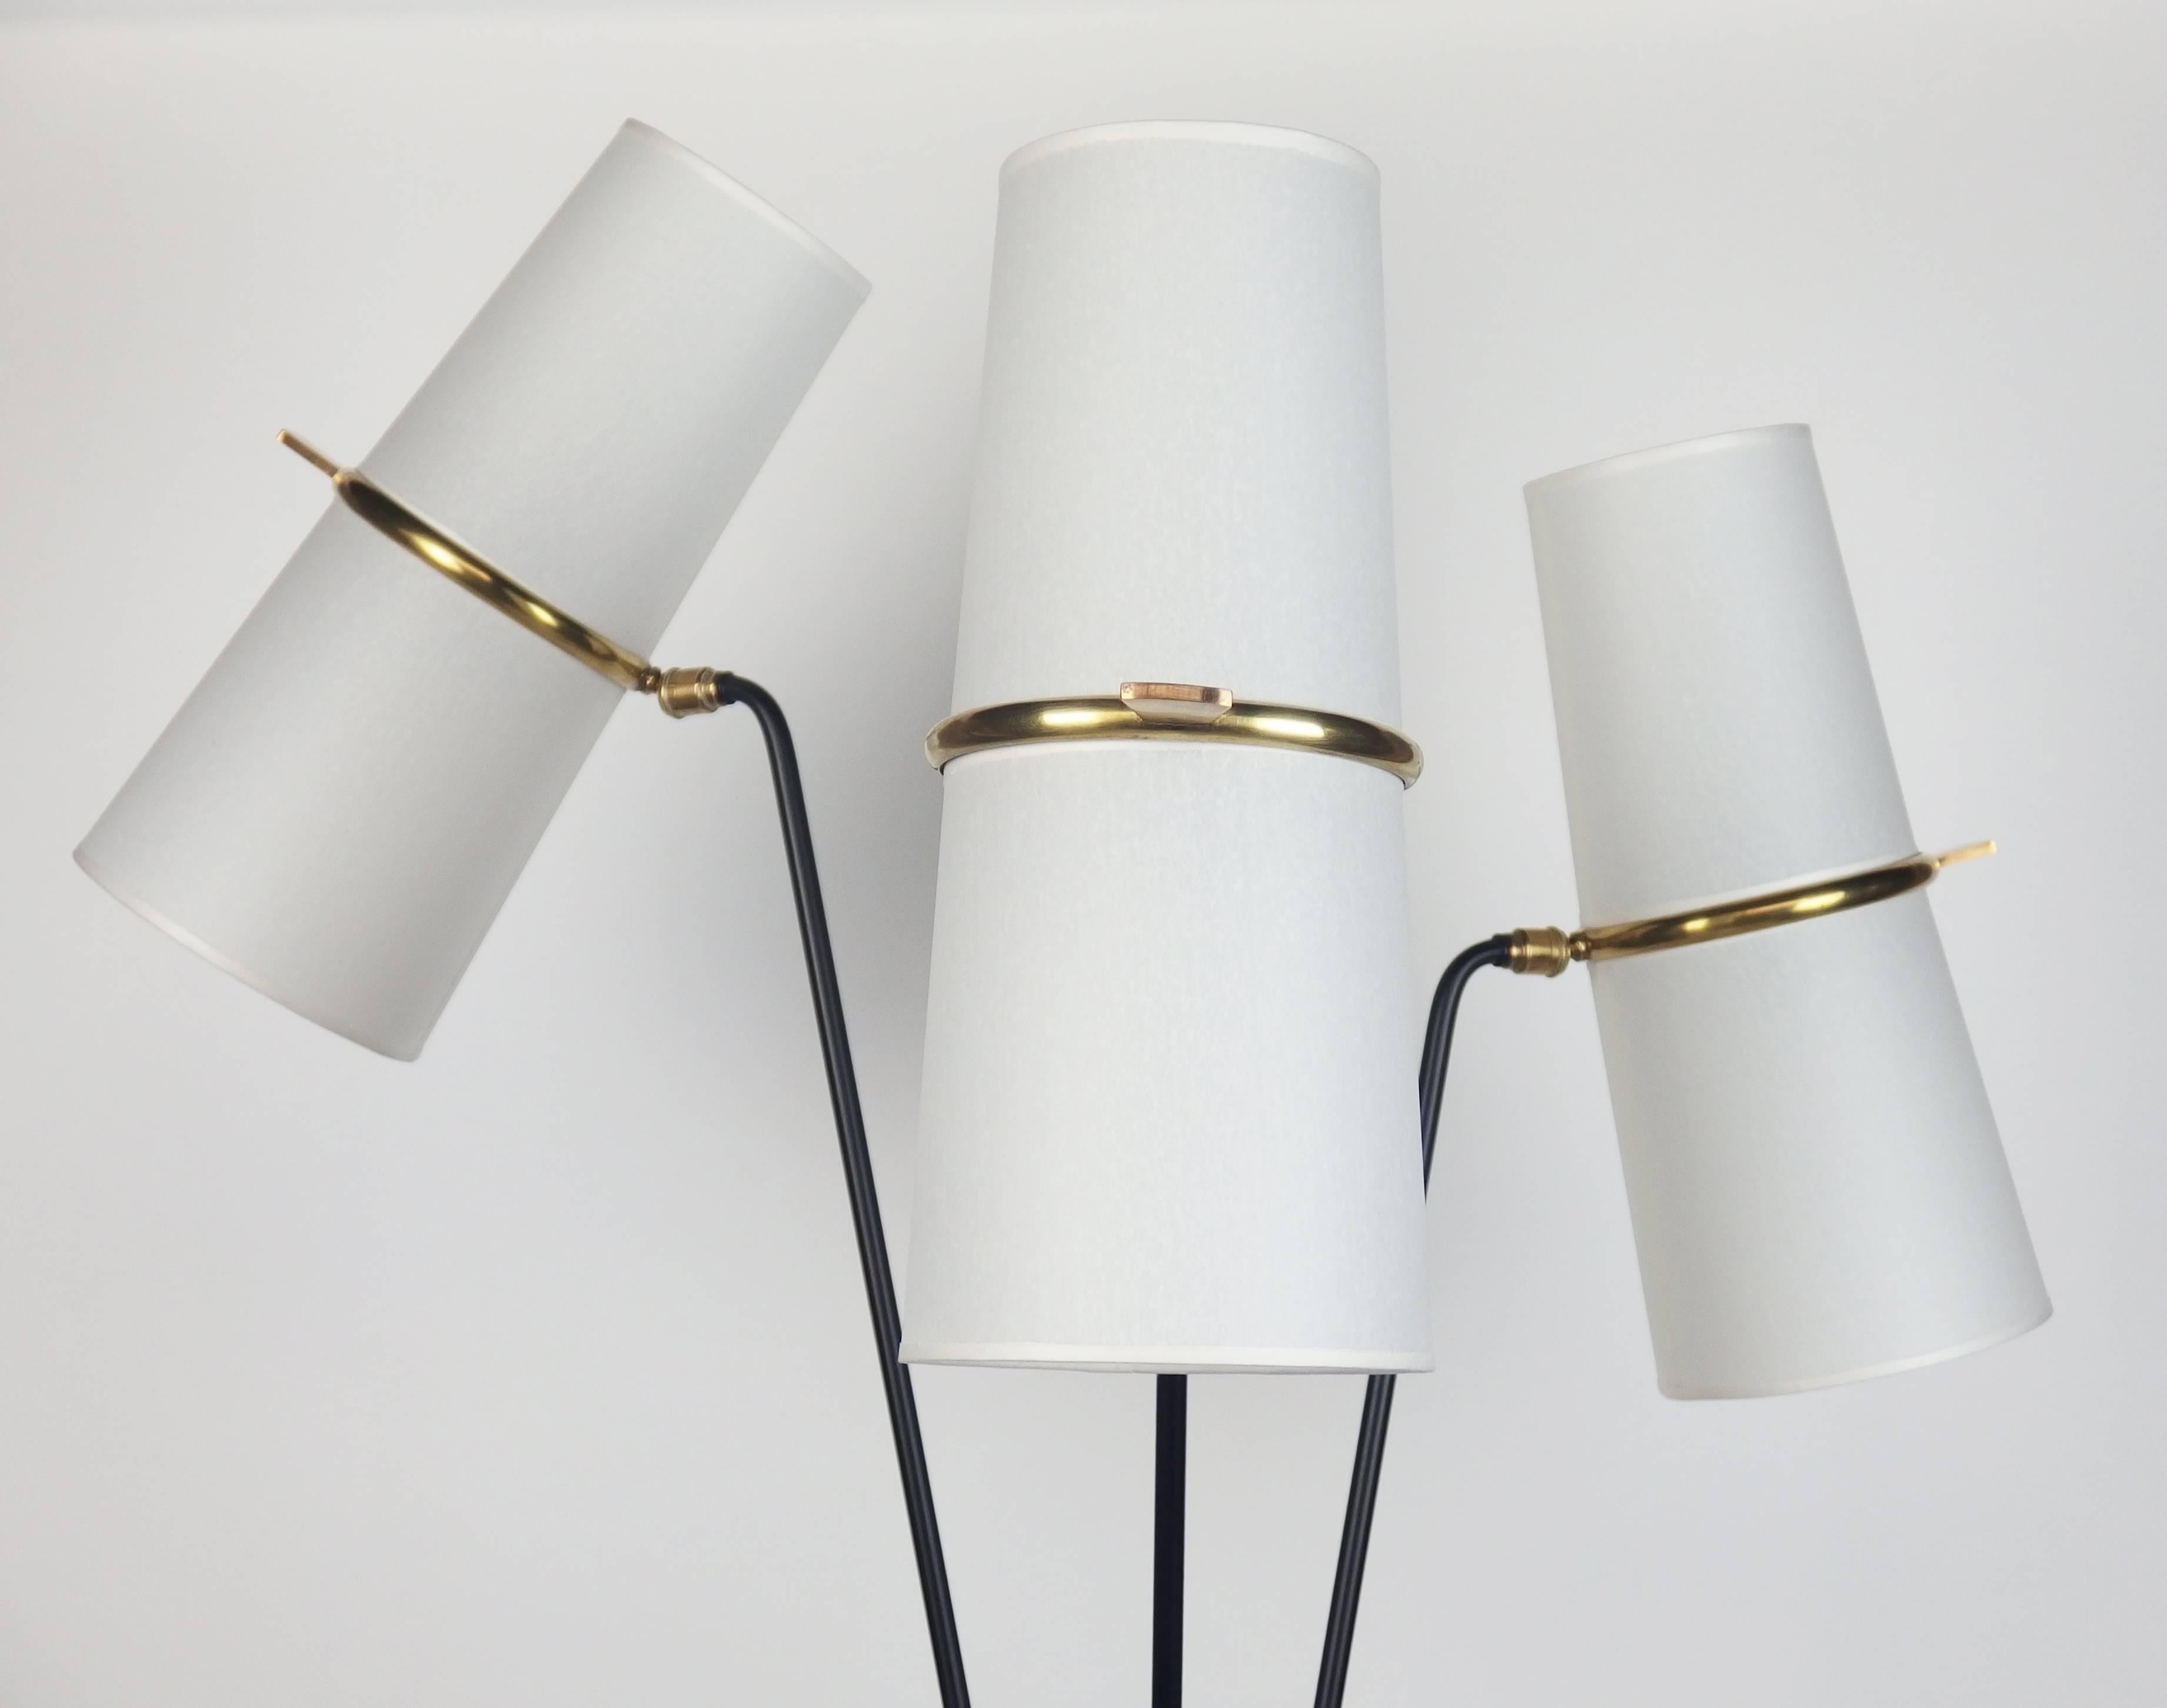 A floor lamp made of black enamelled metal with adjustable brass and paper shades on different heights stems.